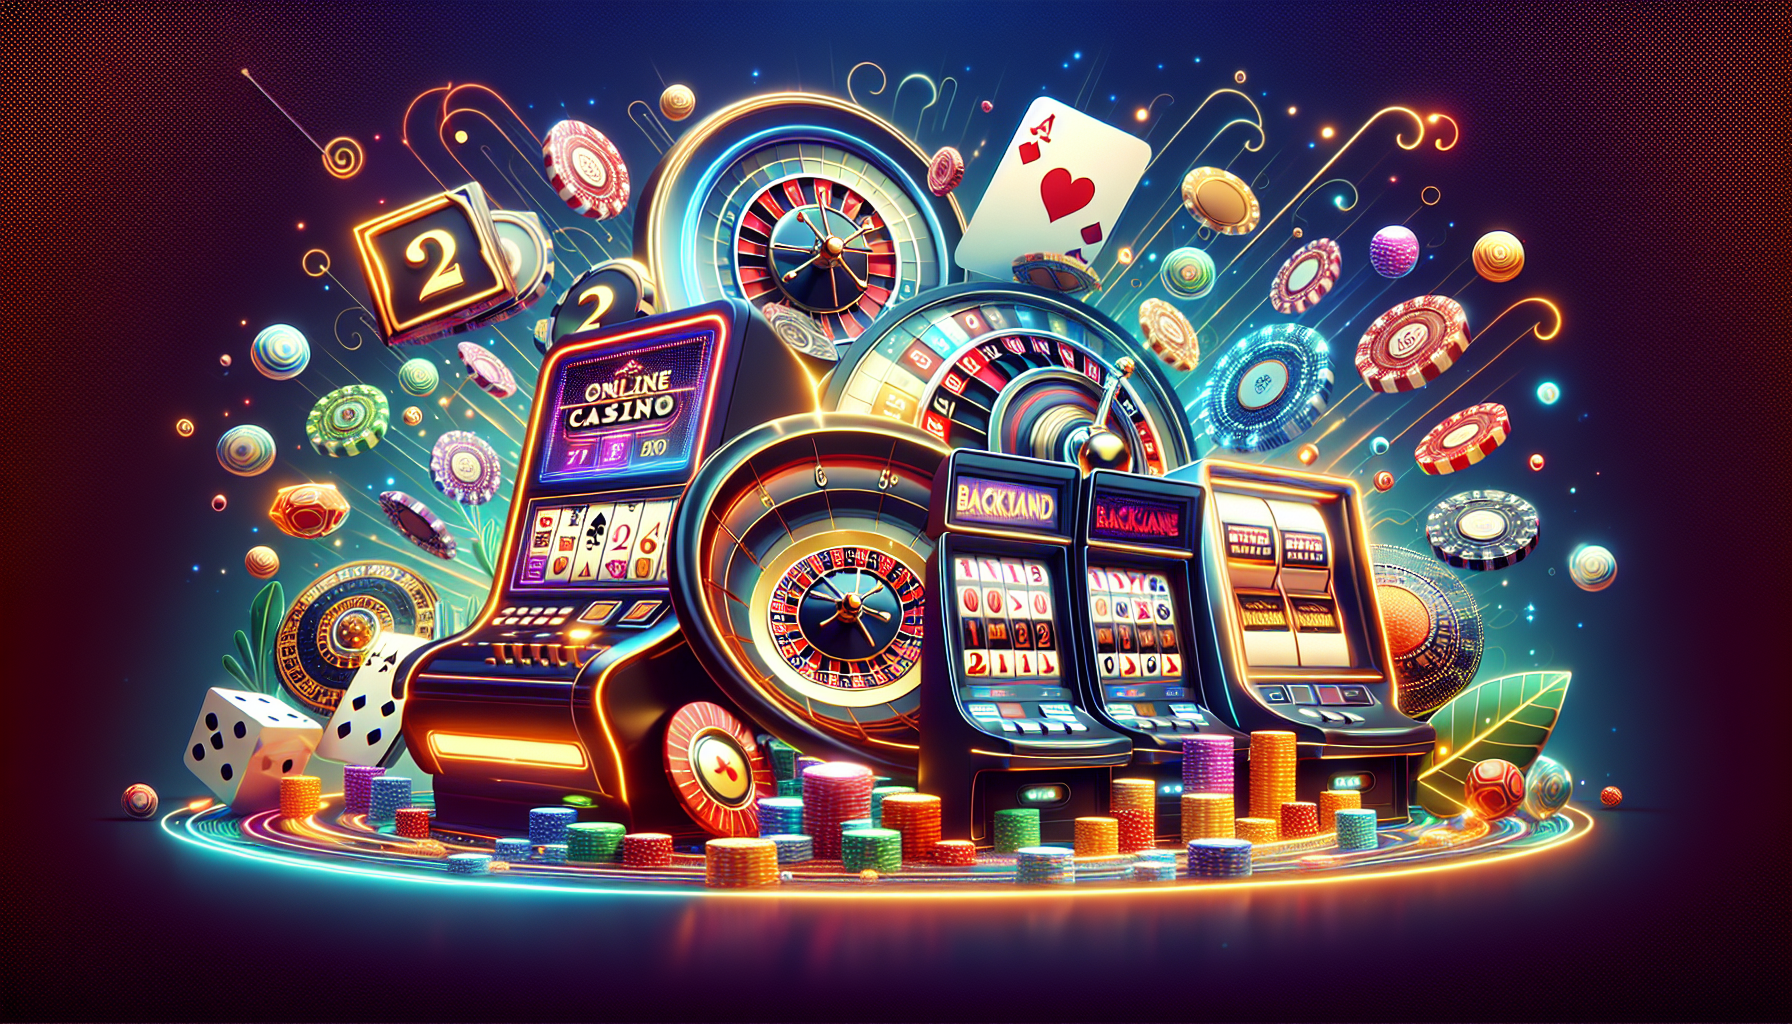 Exploring the virtual card tables: the growing world of online casinos